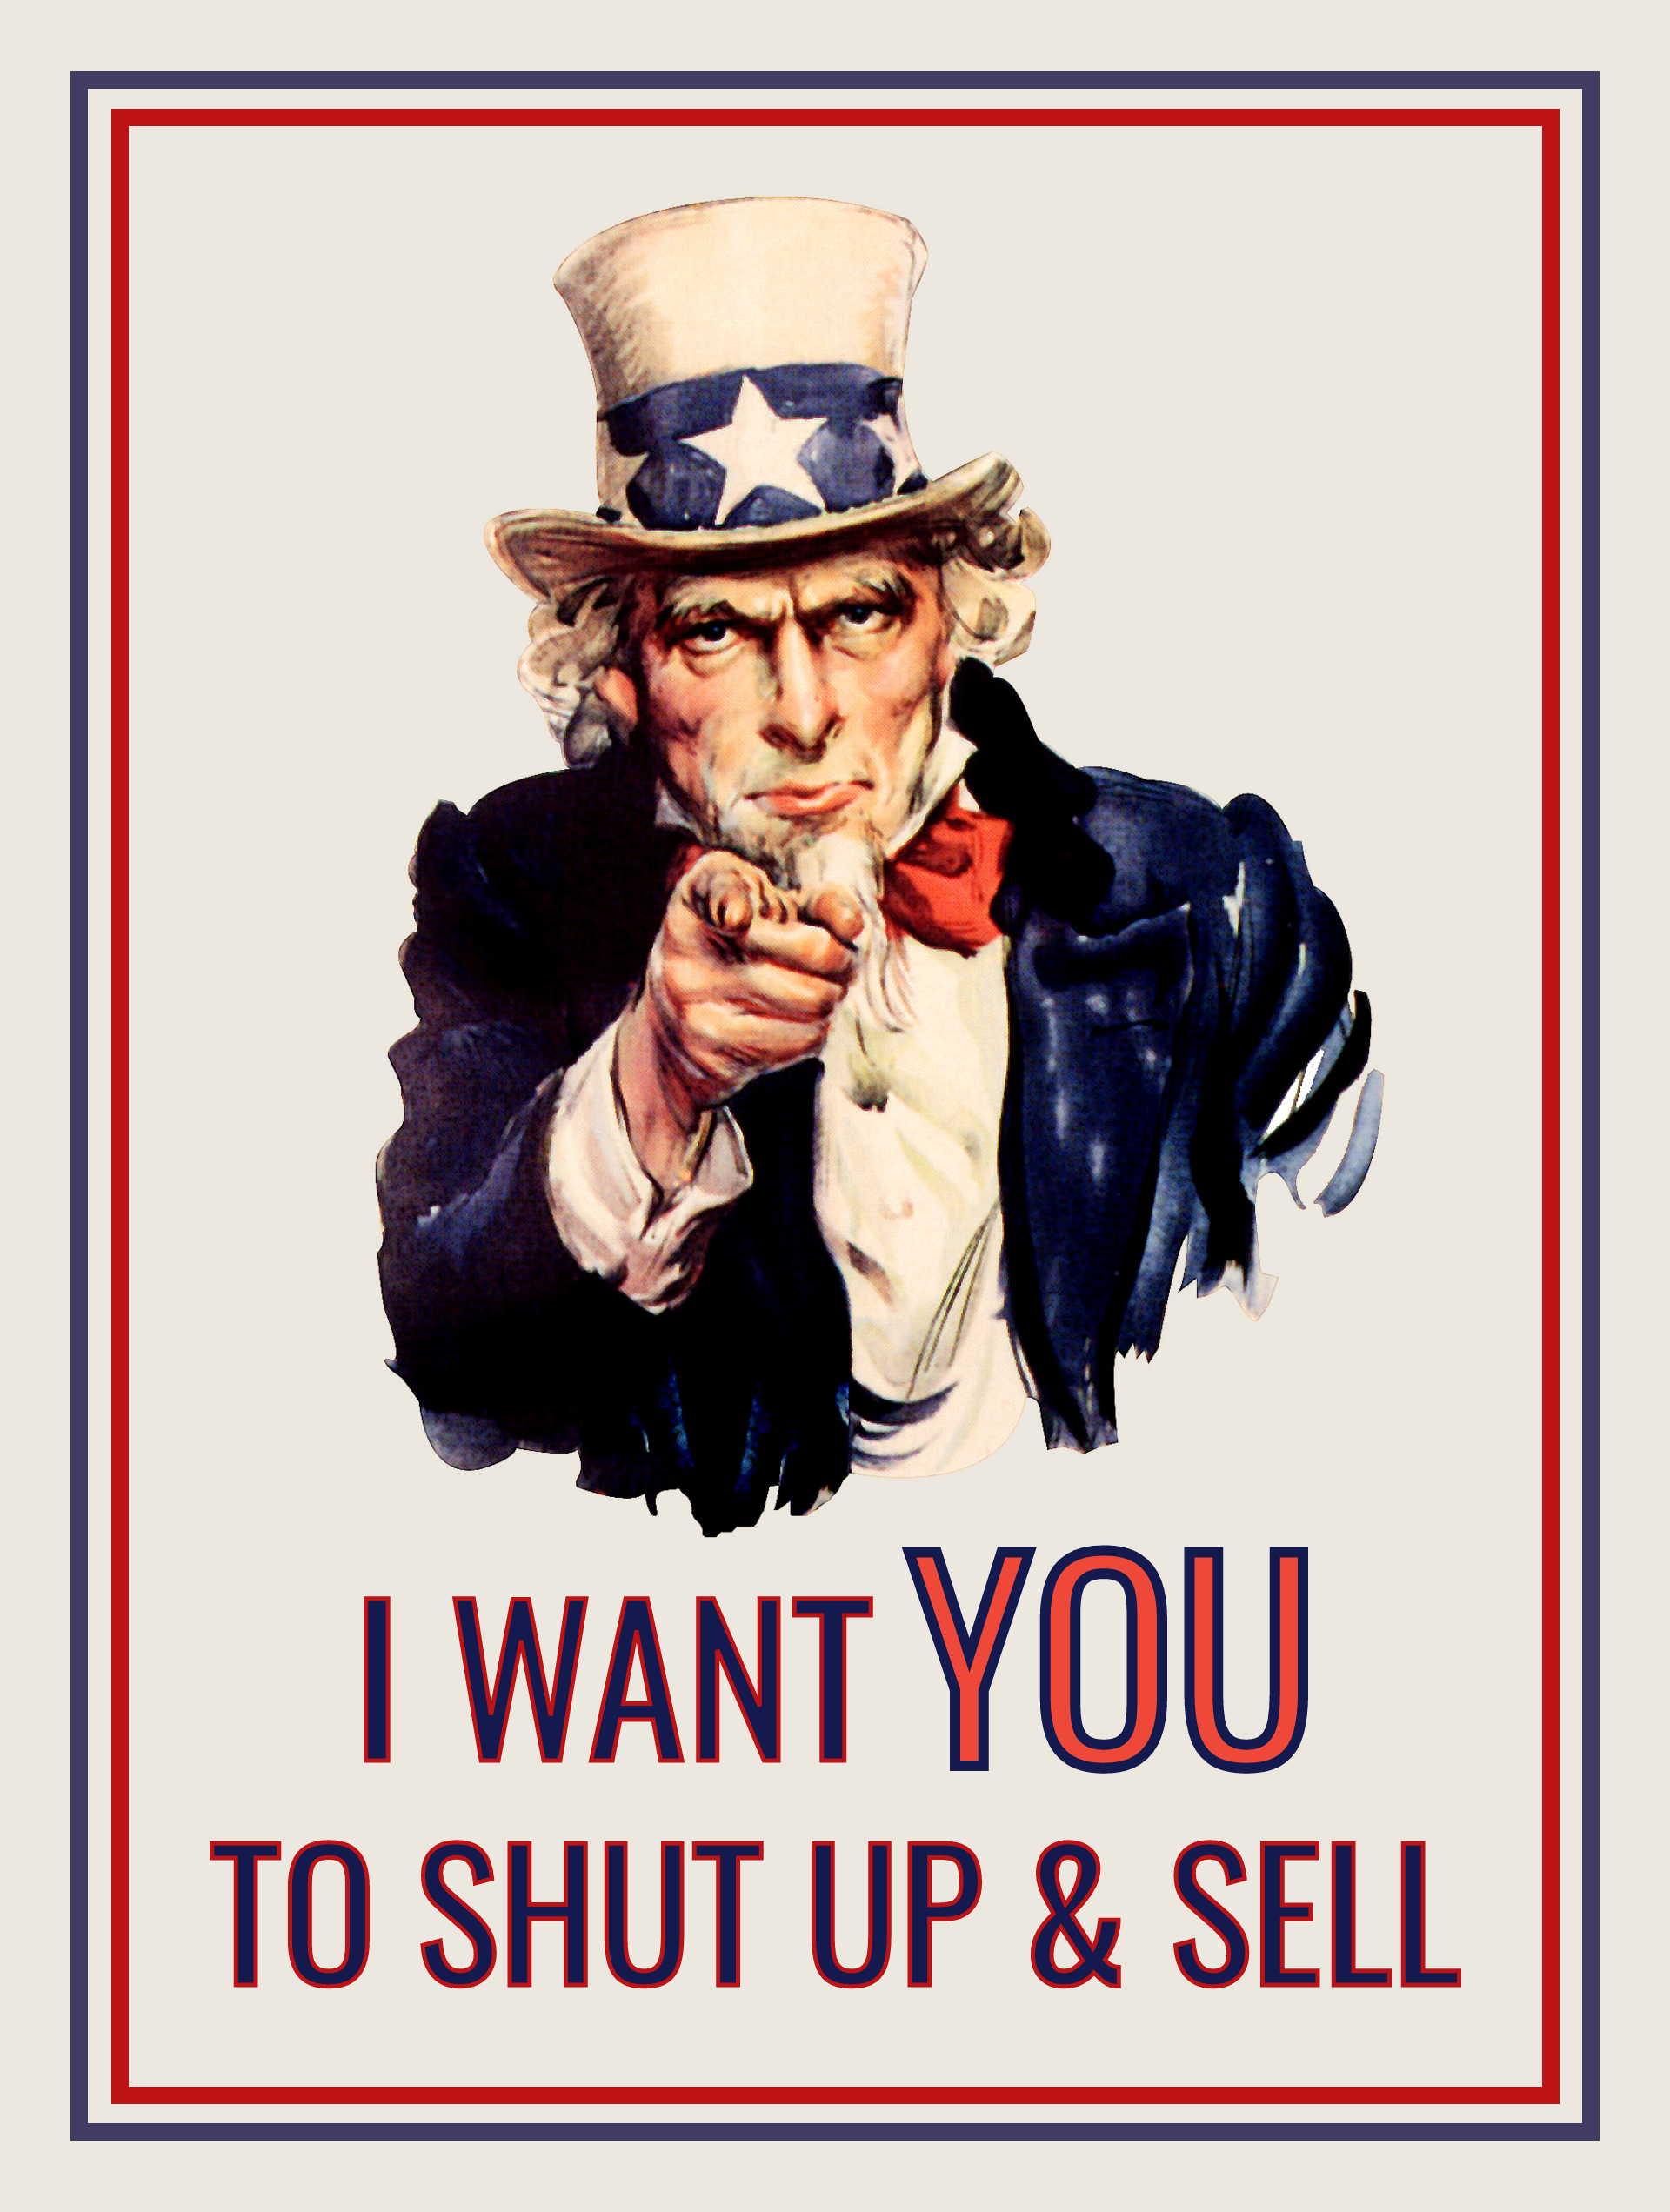 Uncle Sam wants you to shut up and sell